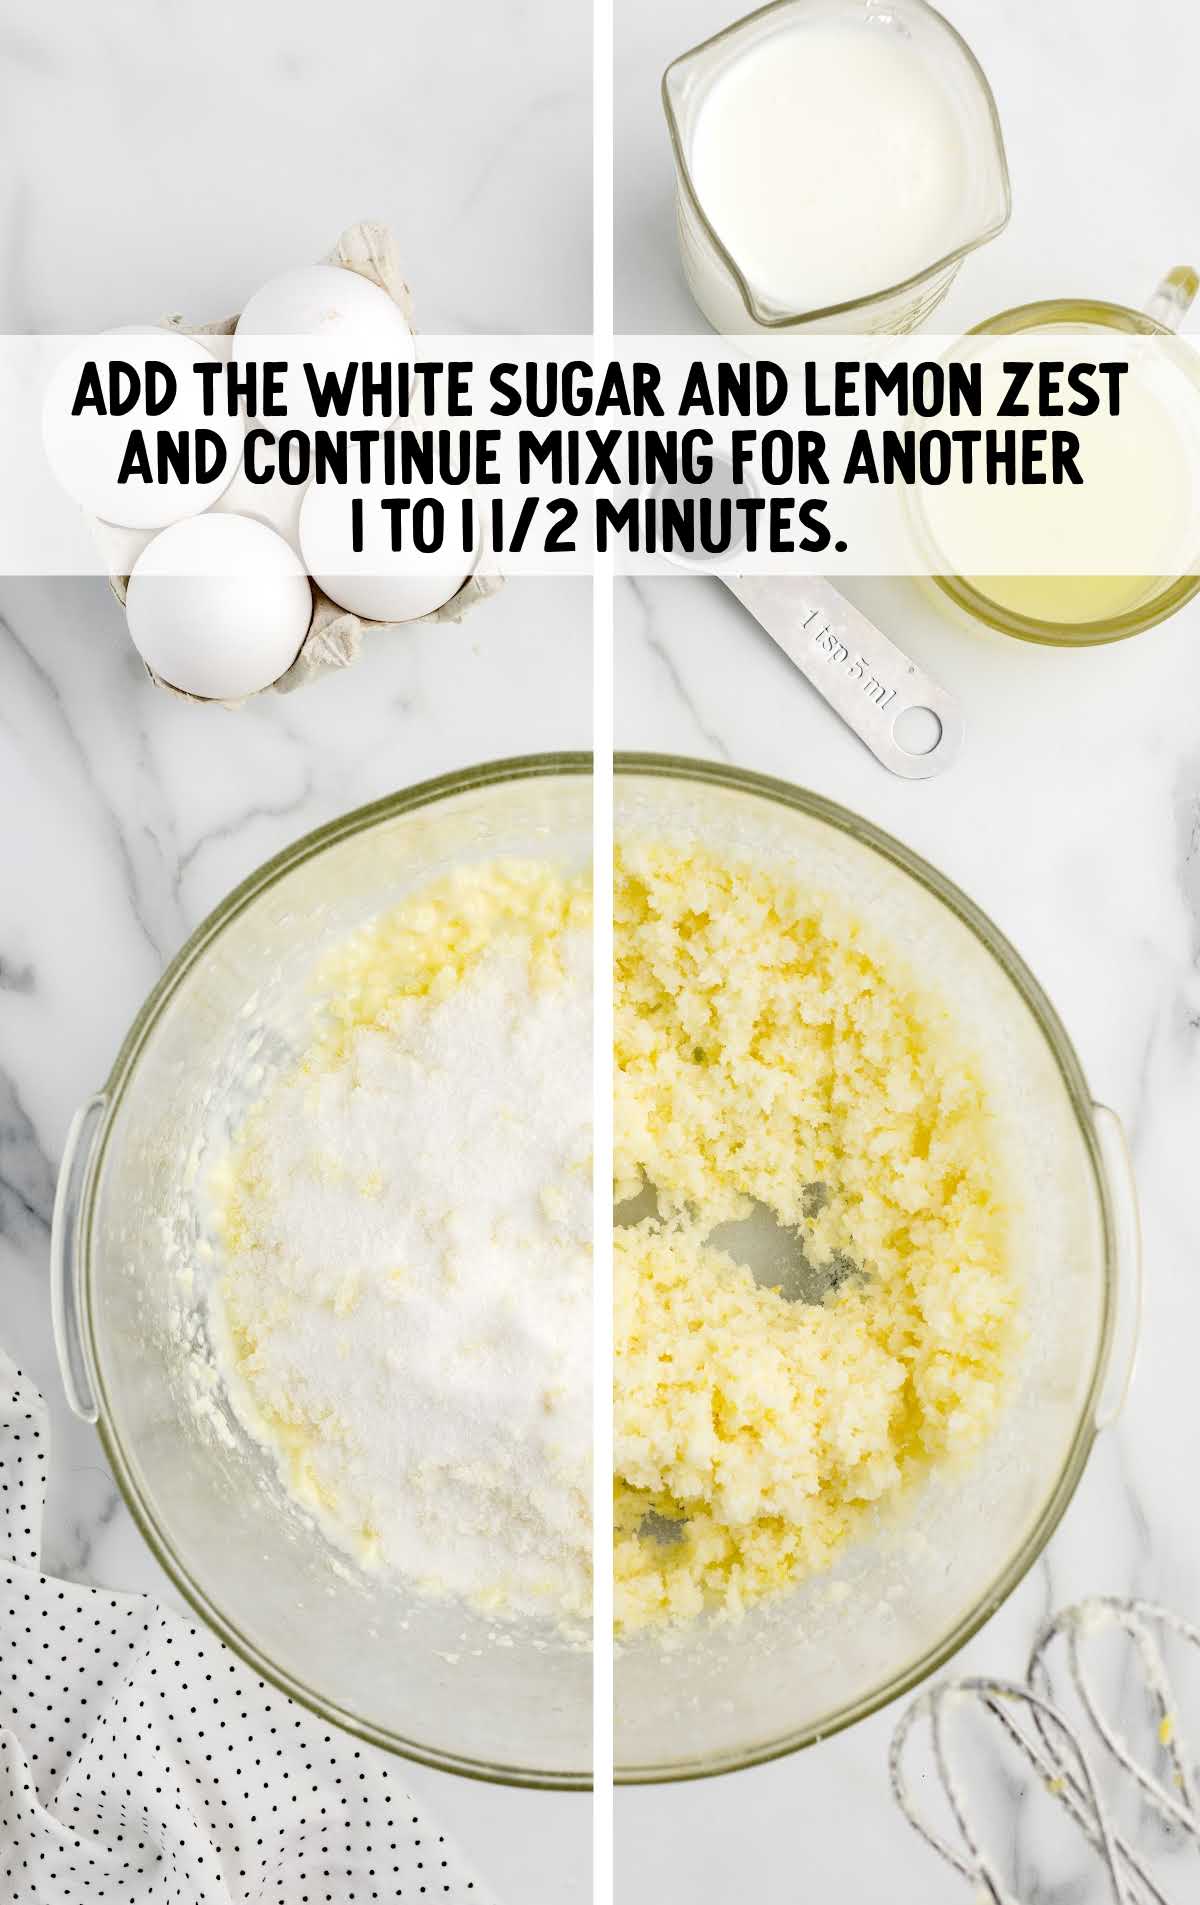 white sugar and lemon zest added to the mixture